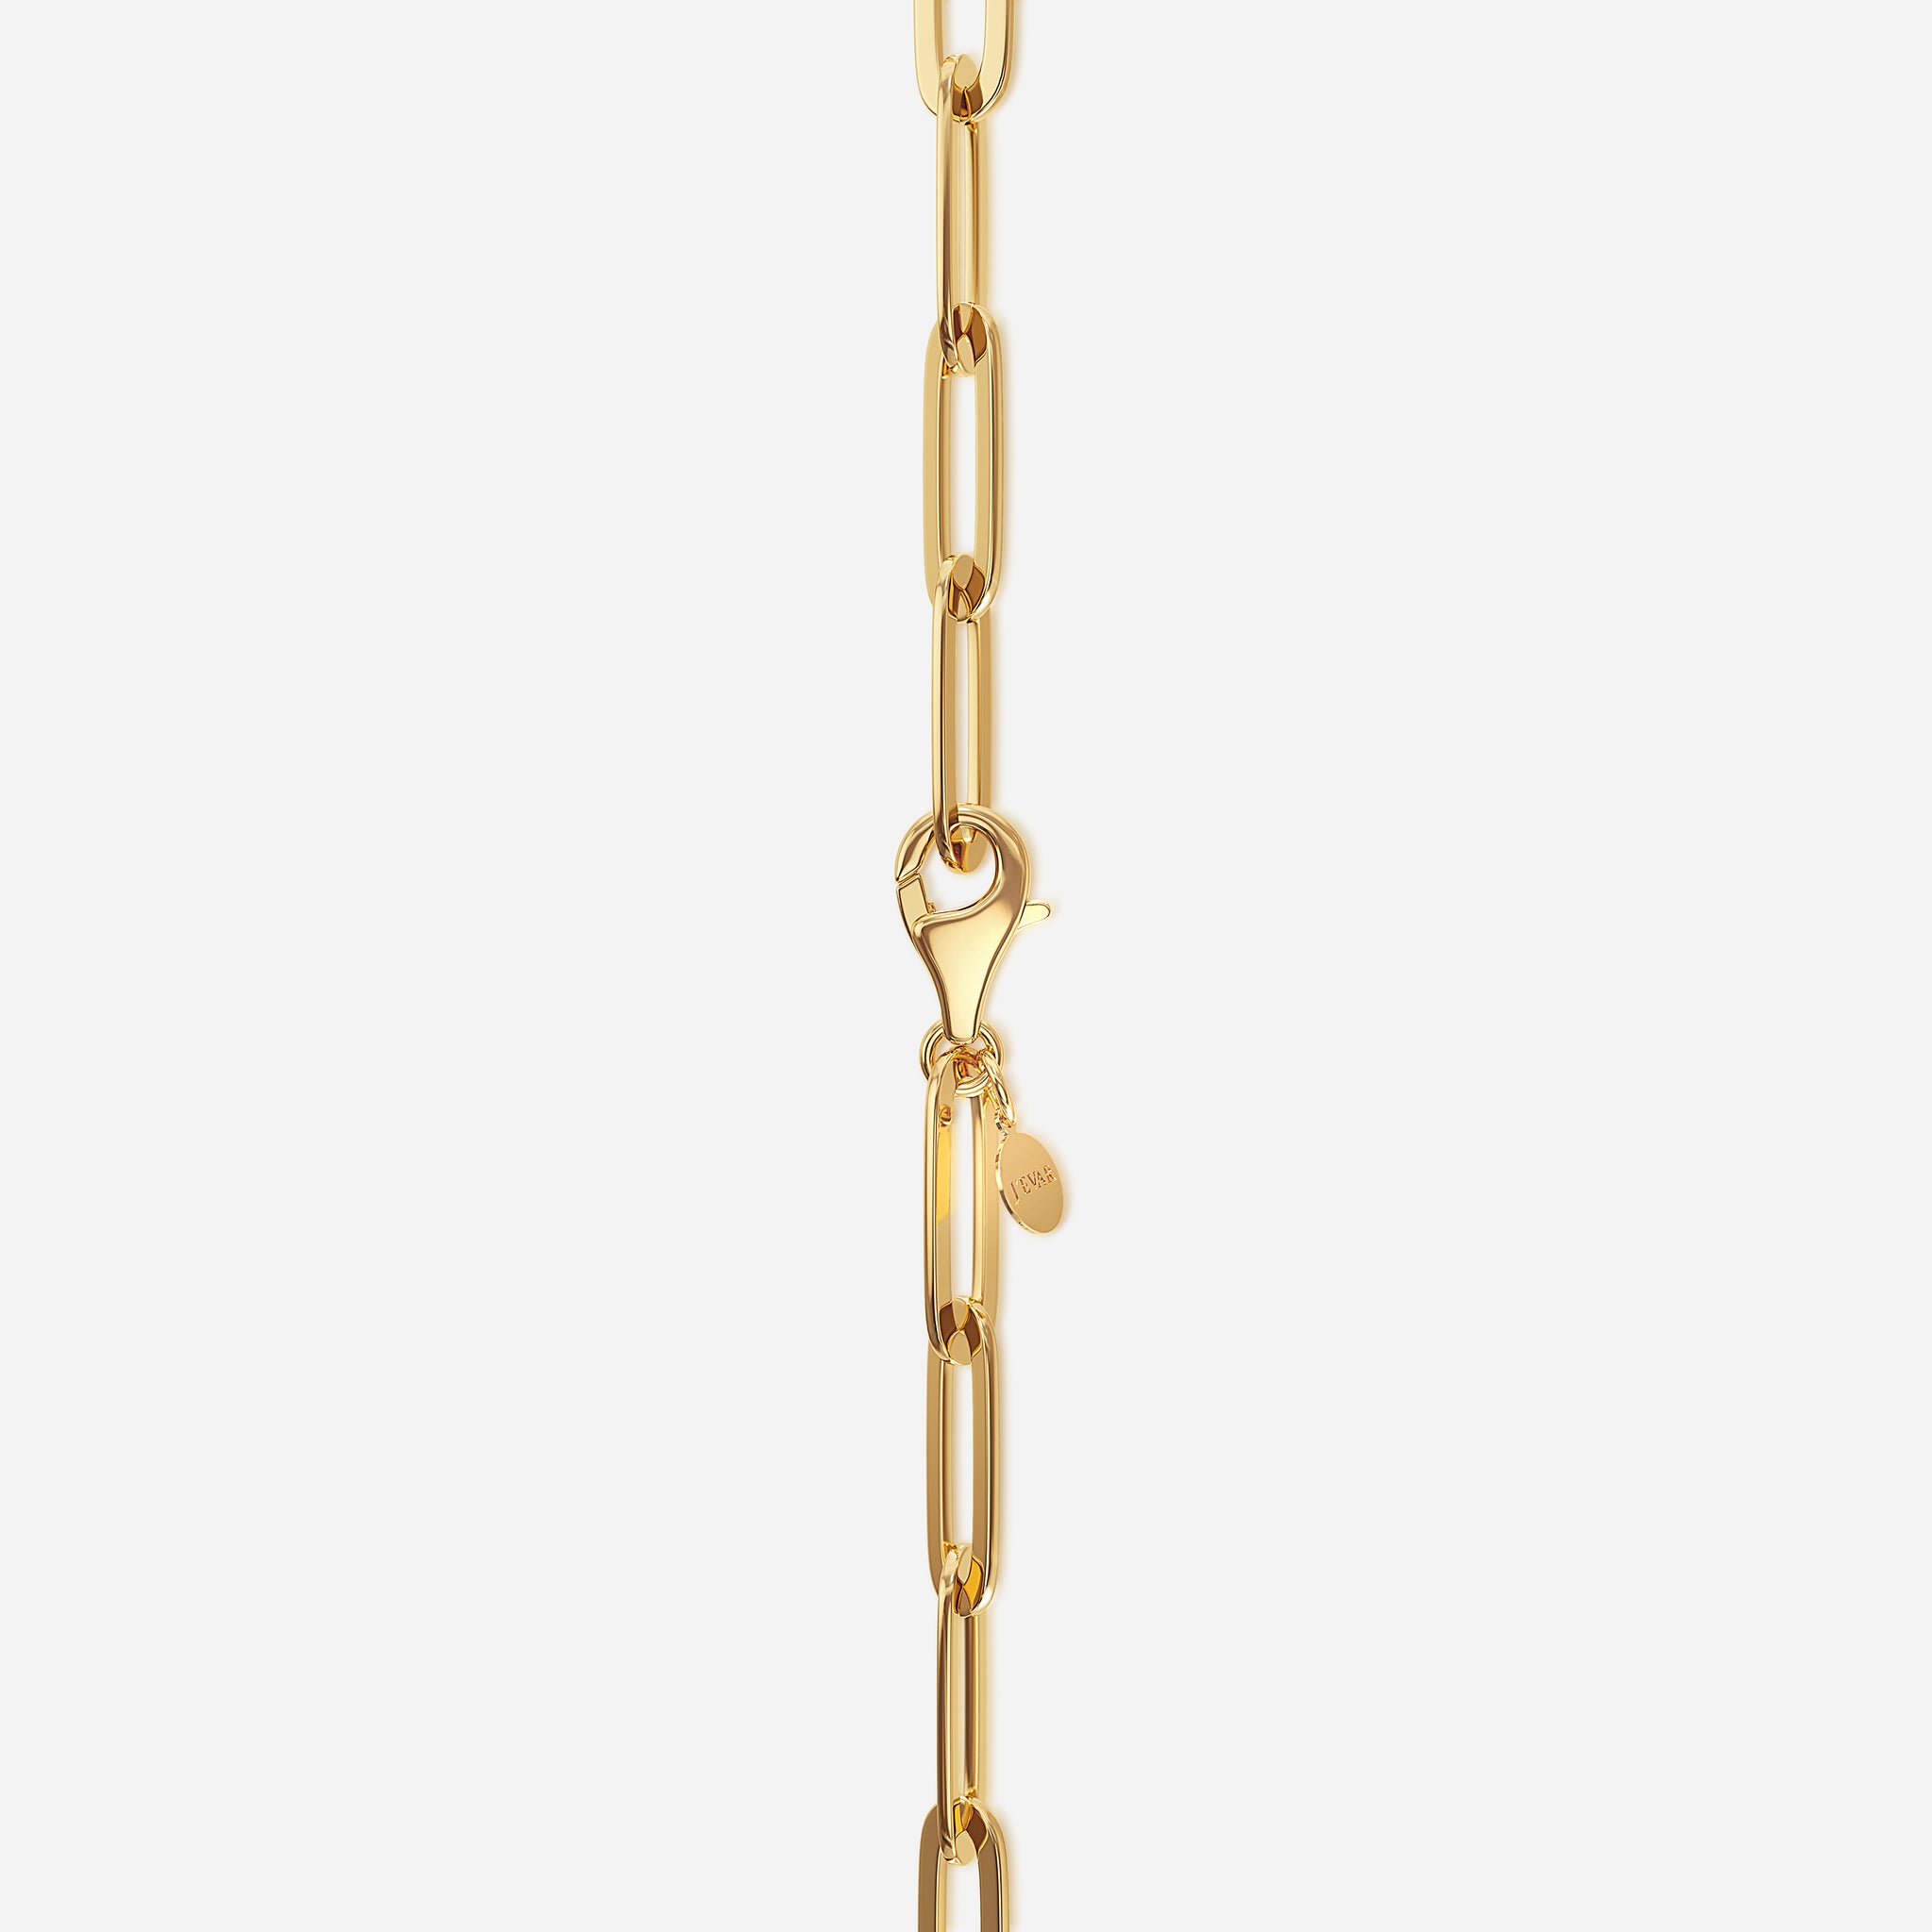 J'EVAR 14KT Yellow Gold Paperclip Lariat Heart ALTR Lab Grown Diamond Necklace Lock View